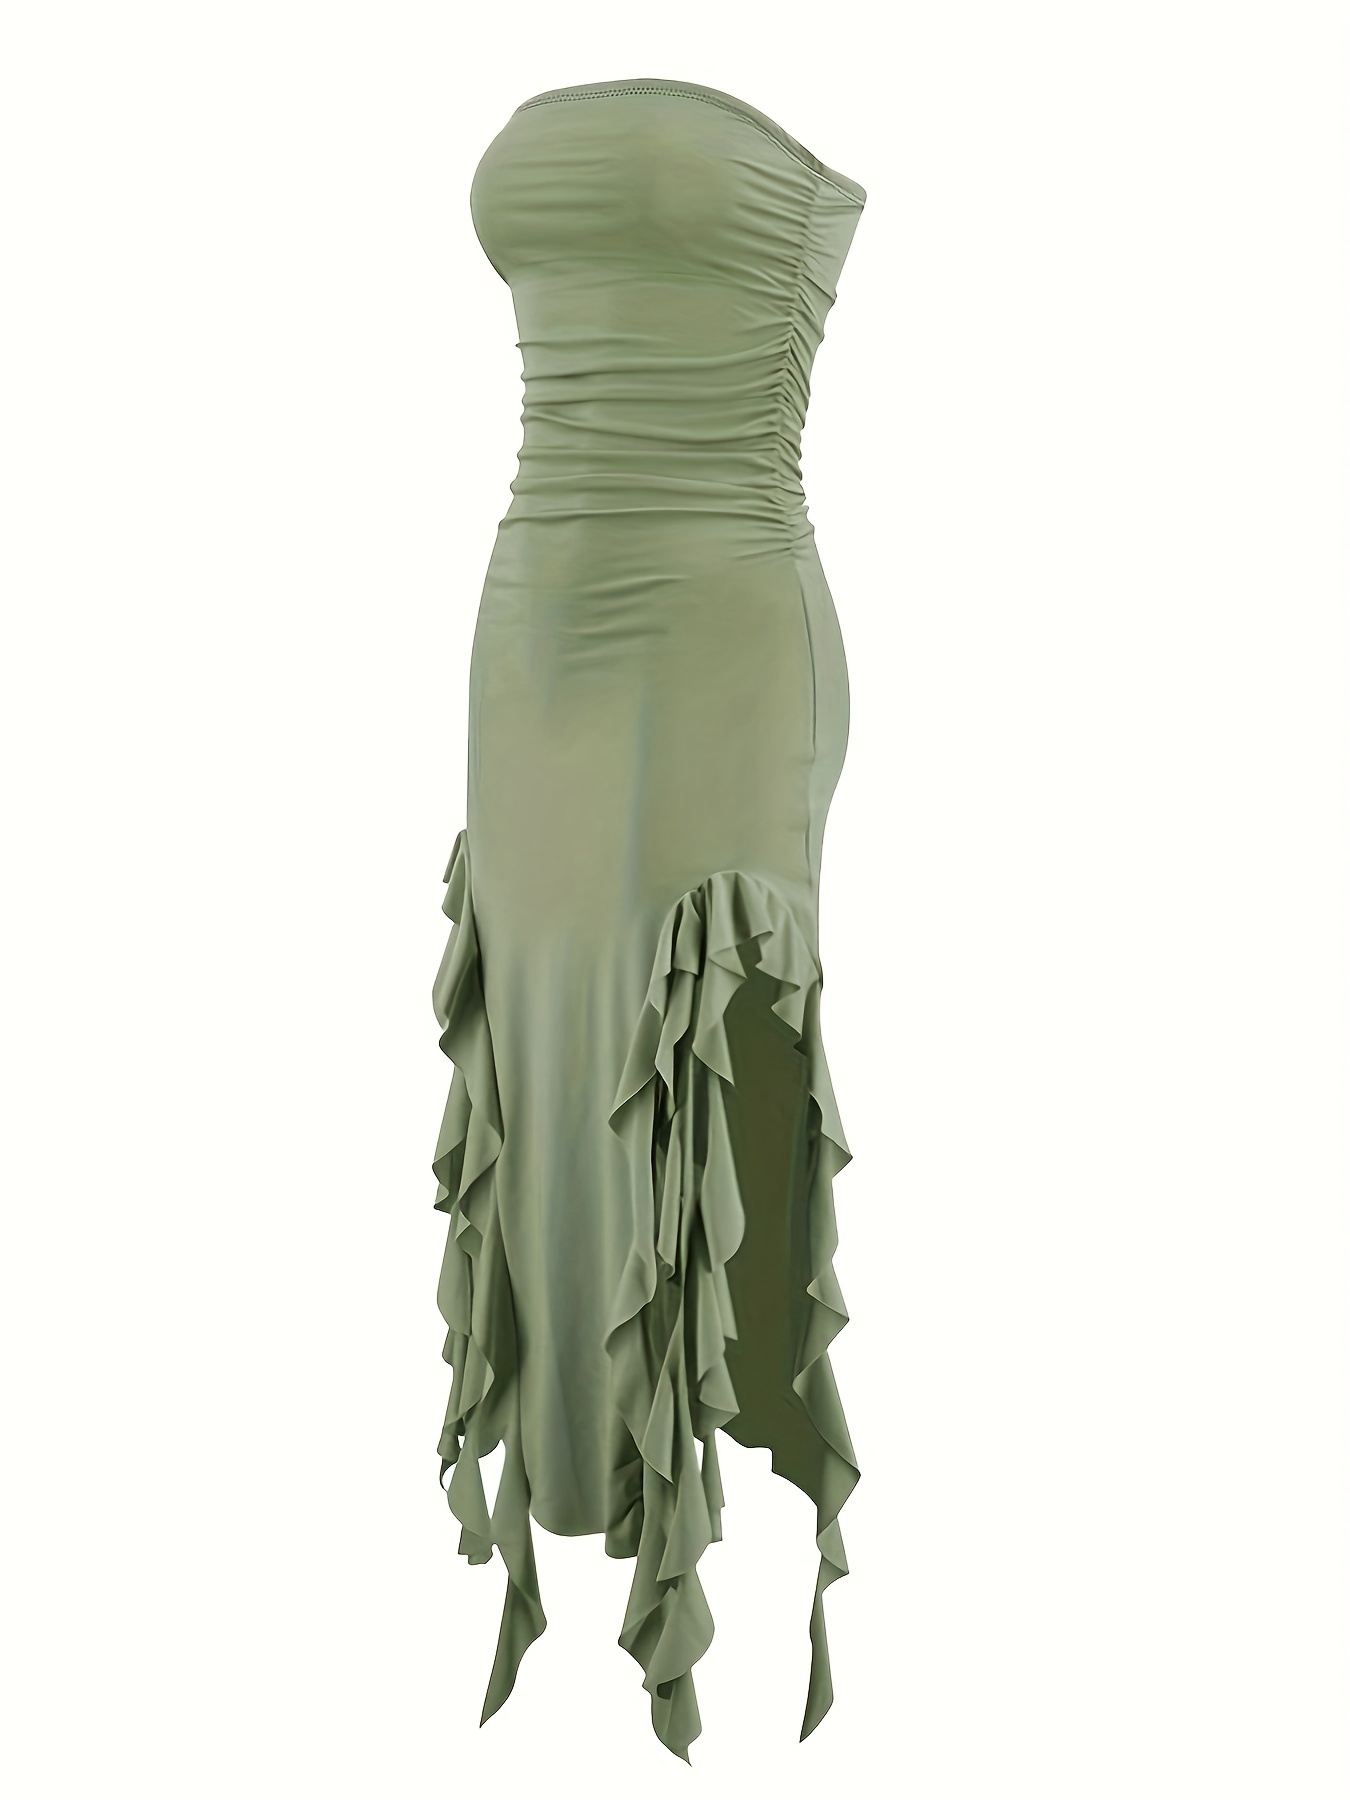 Olive Green Transformable Tube Dress